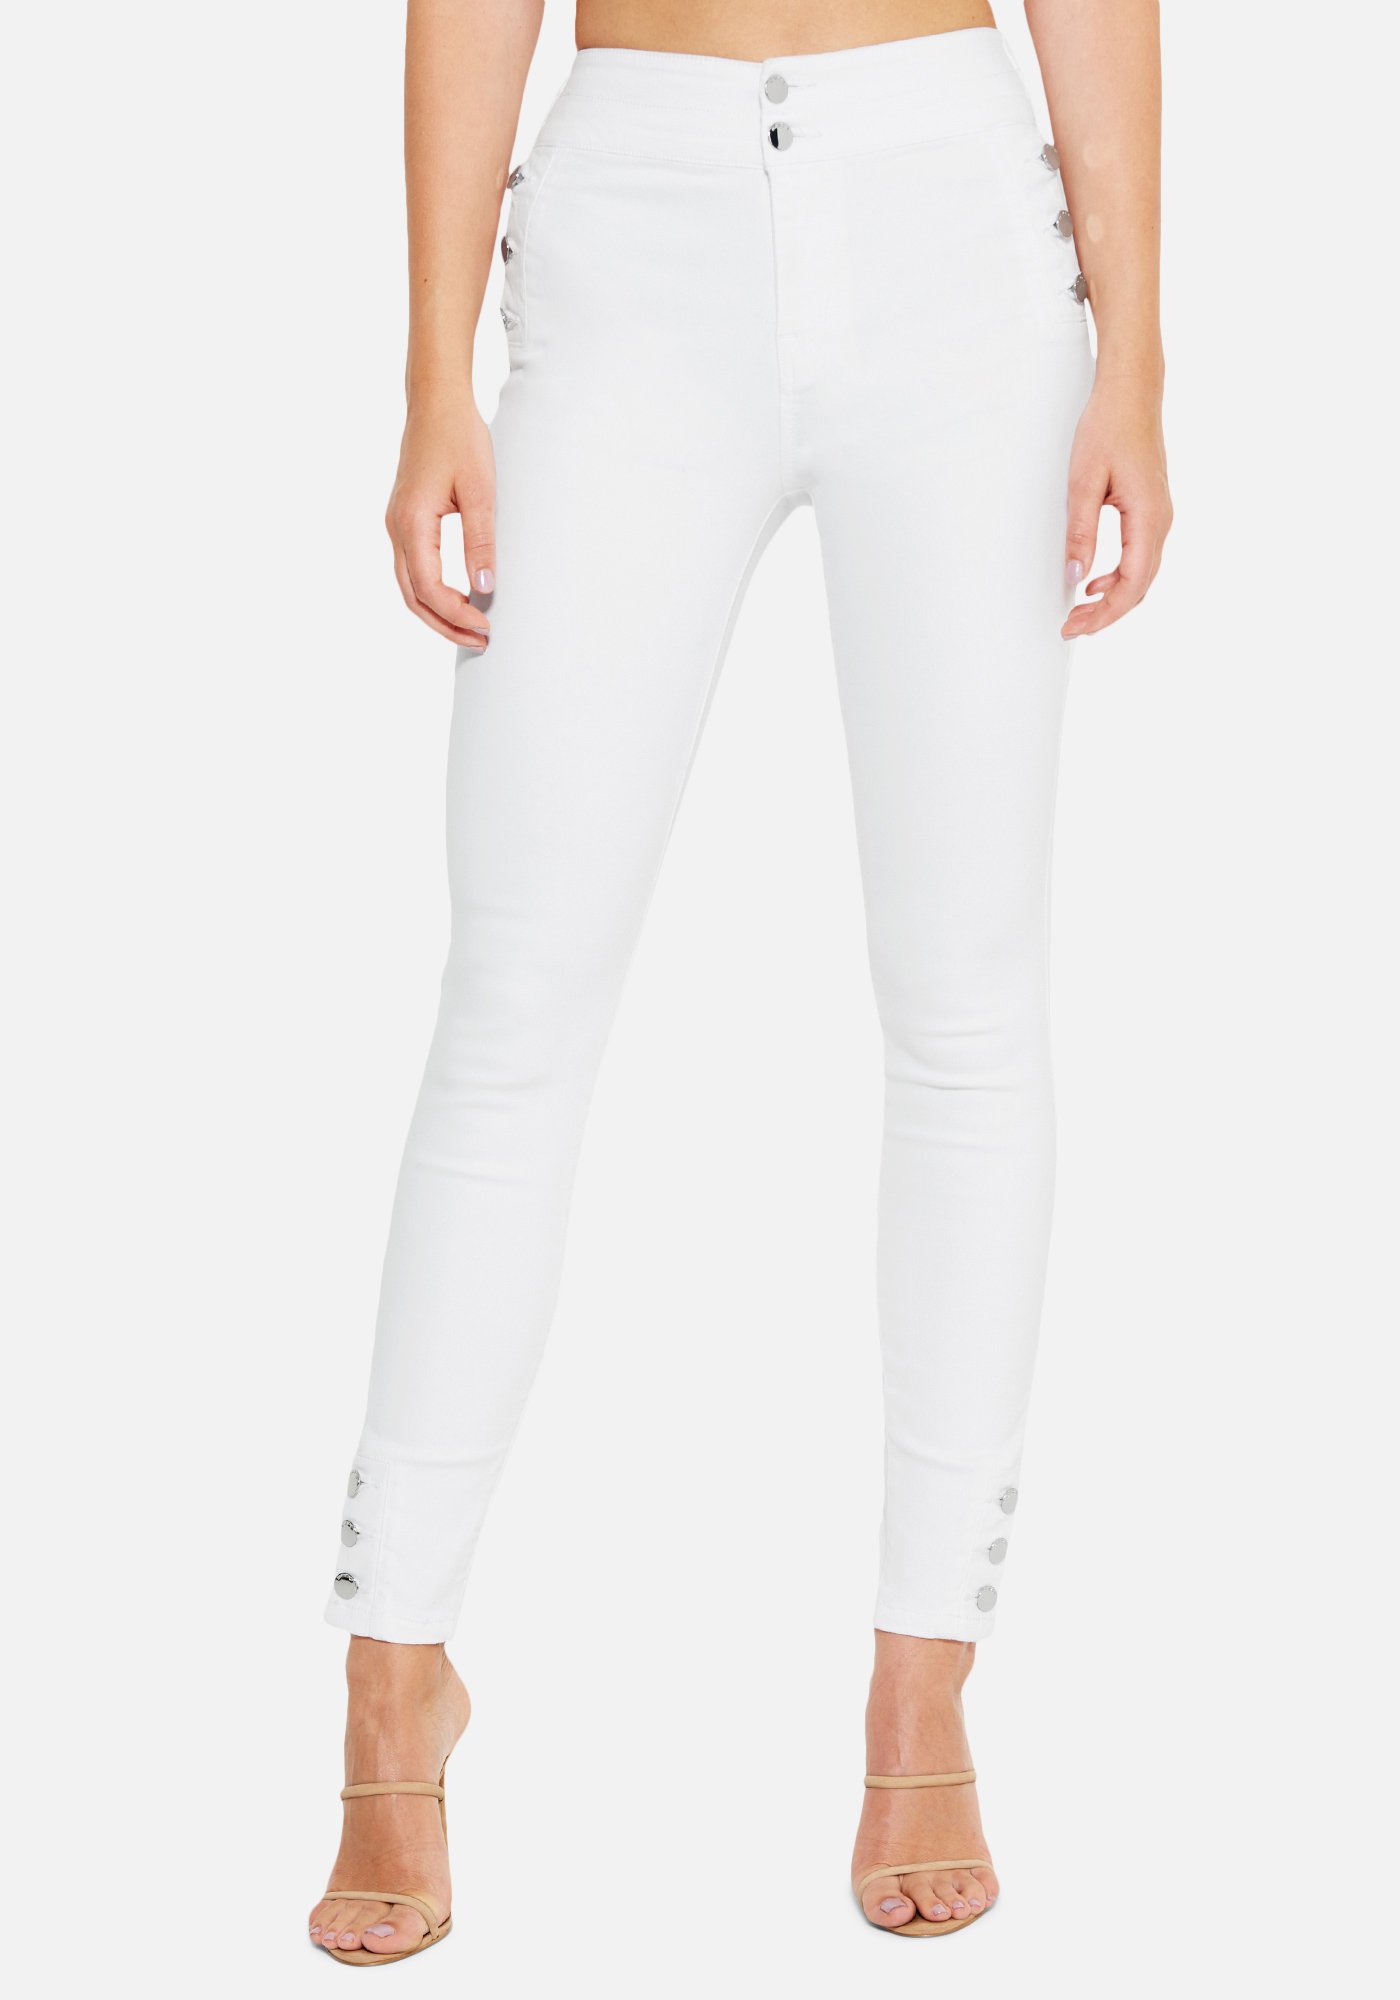 Bebe Women's Button Detail Skinny Jeans, Size 26 in WHITE Cotton/Spandex